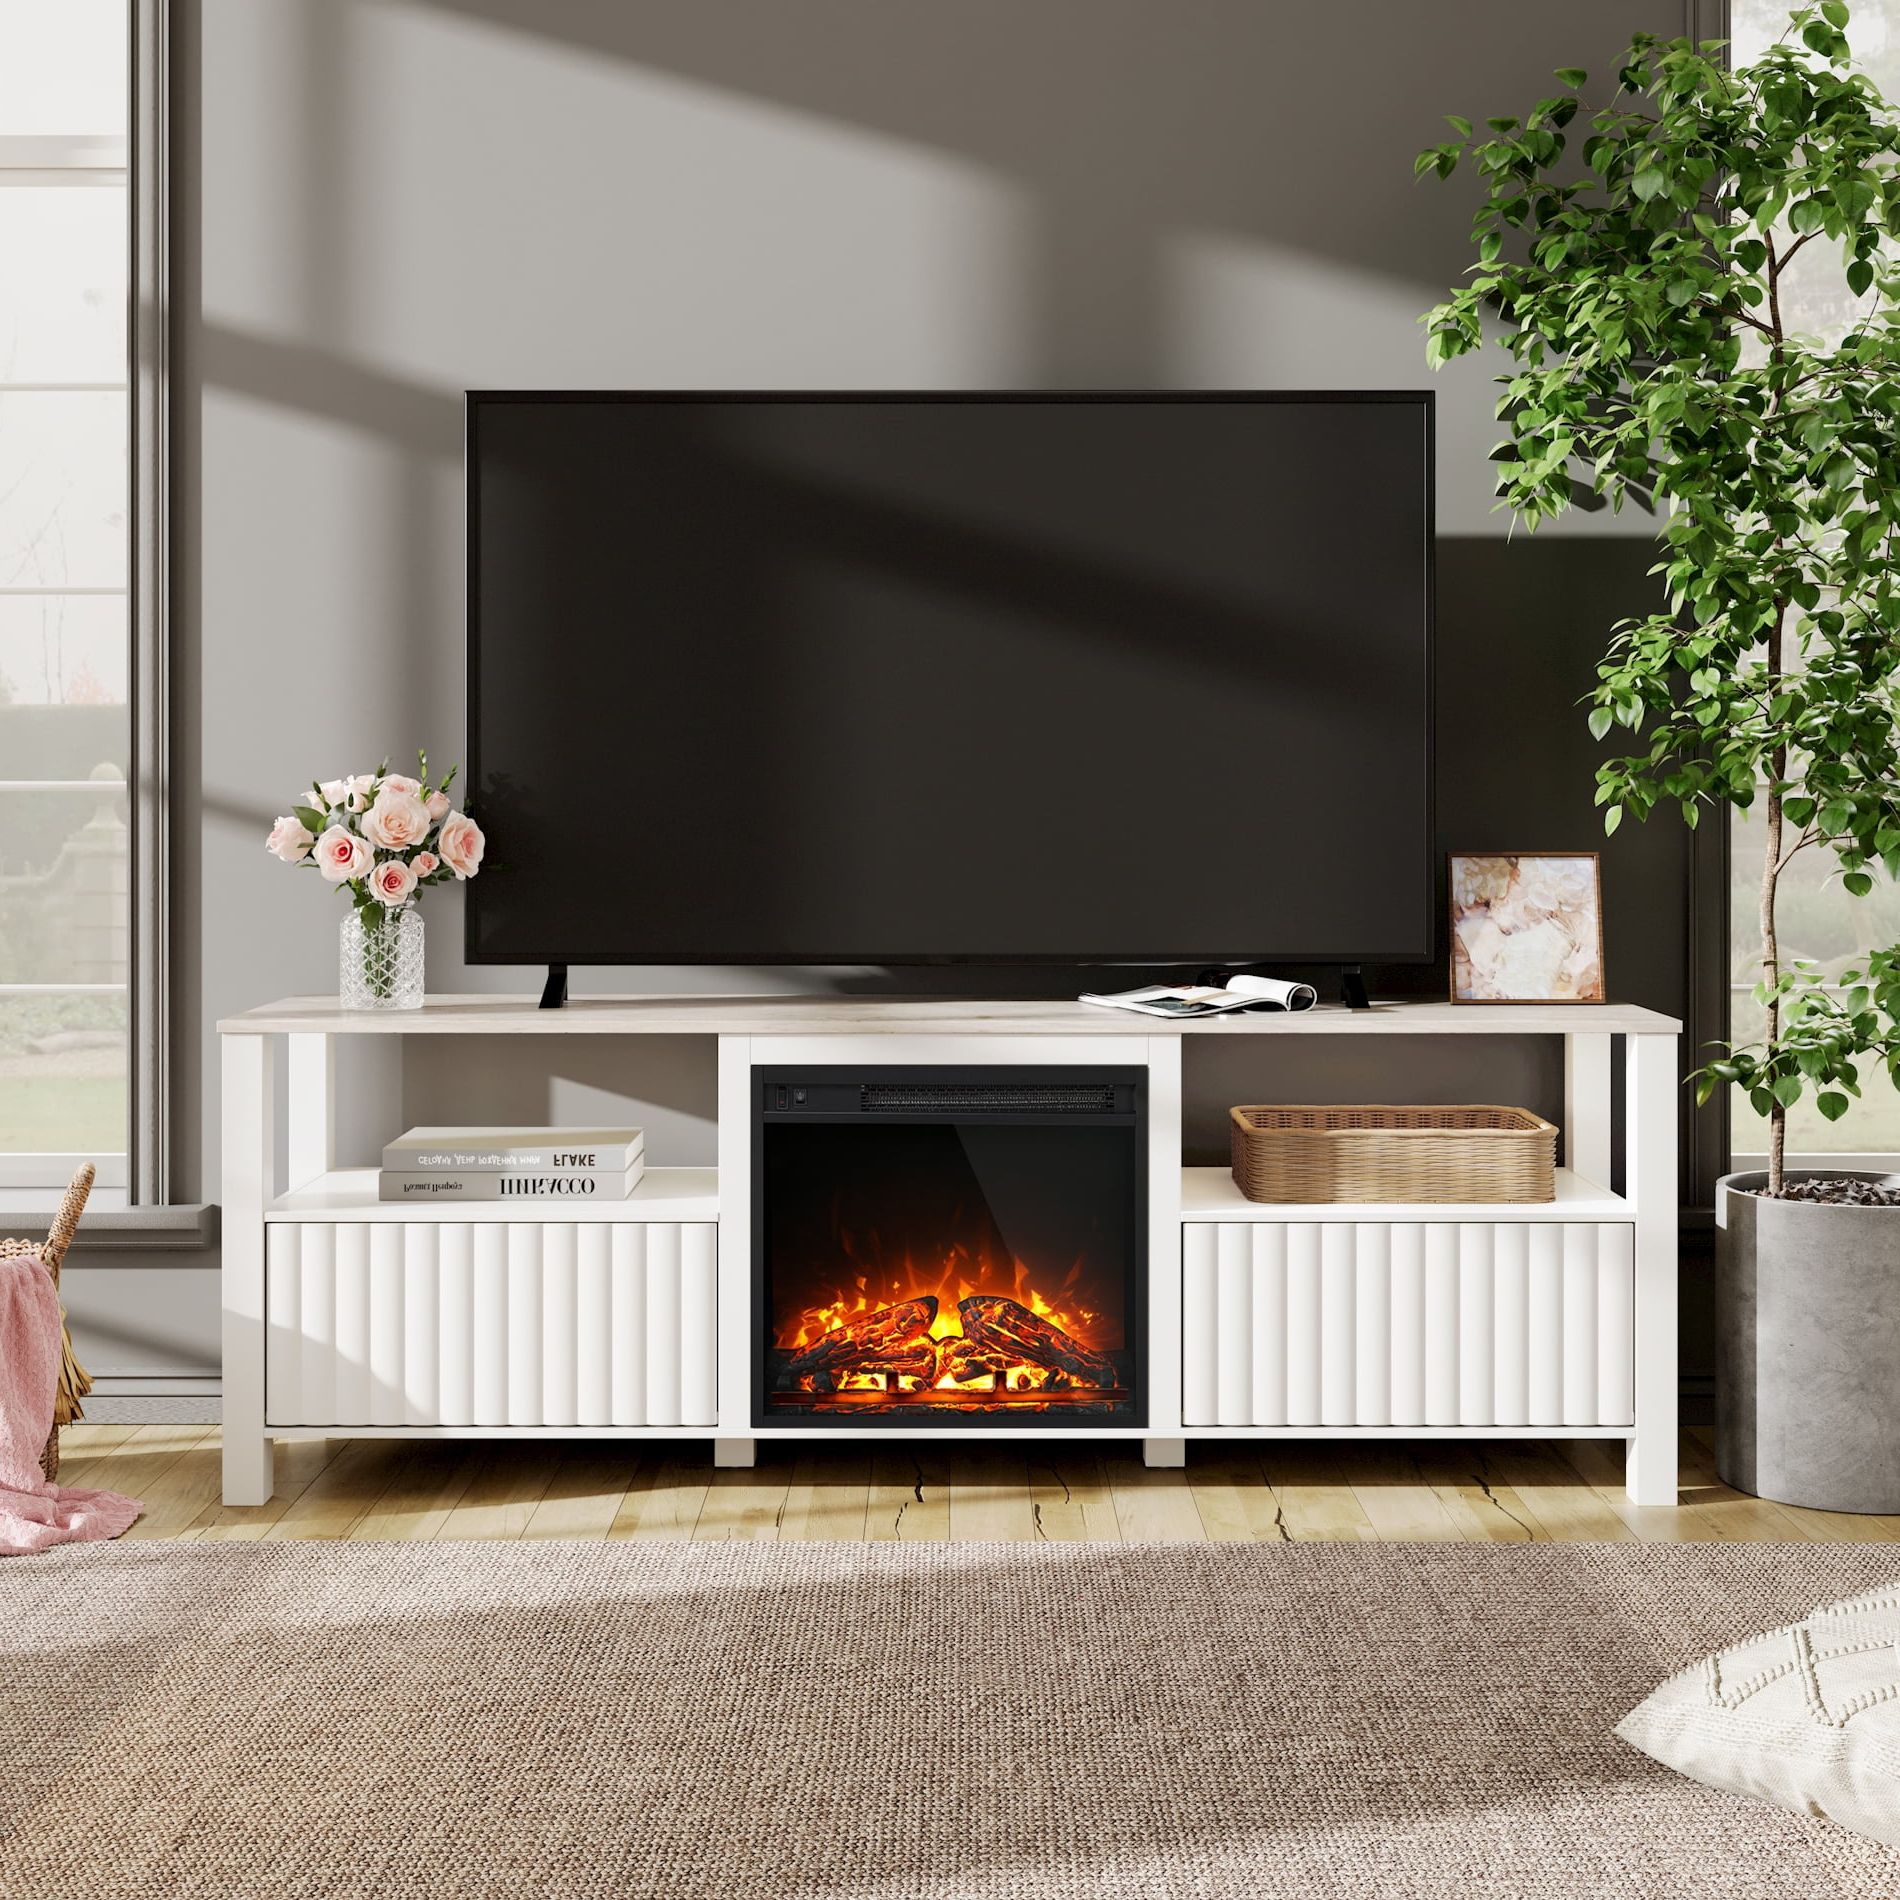 Fireplace Tv Stand For Tv's Up To 75 Inch, White Led Entertainment Center  For 80 Inch Tv With Electric Fireplace For Living Room Bedroom, 70 Inch –  Walmart In White Tv Stands Entertainment Center (View 12 of 20)